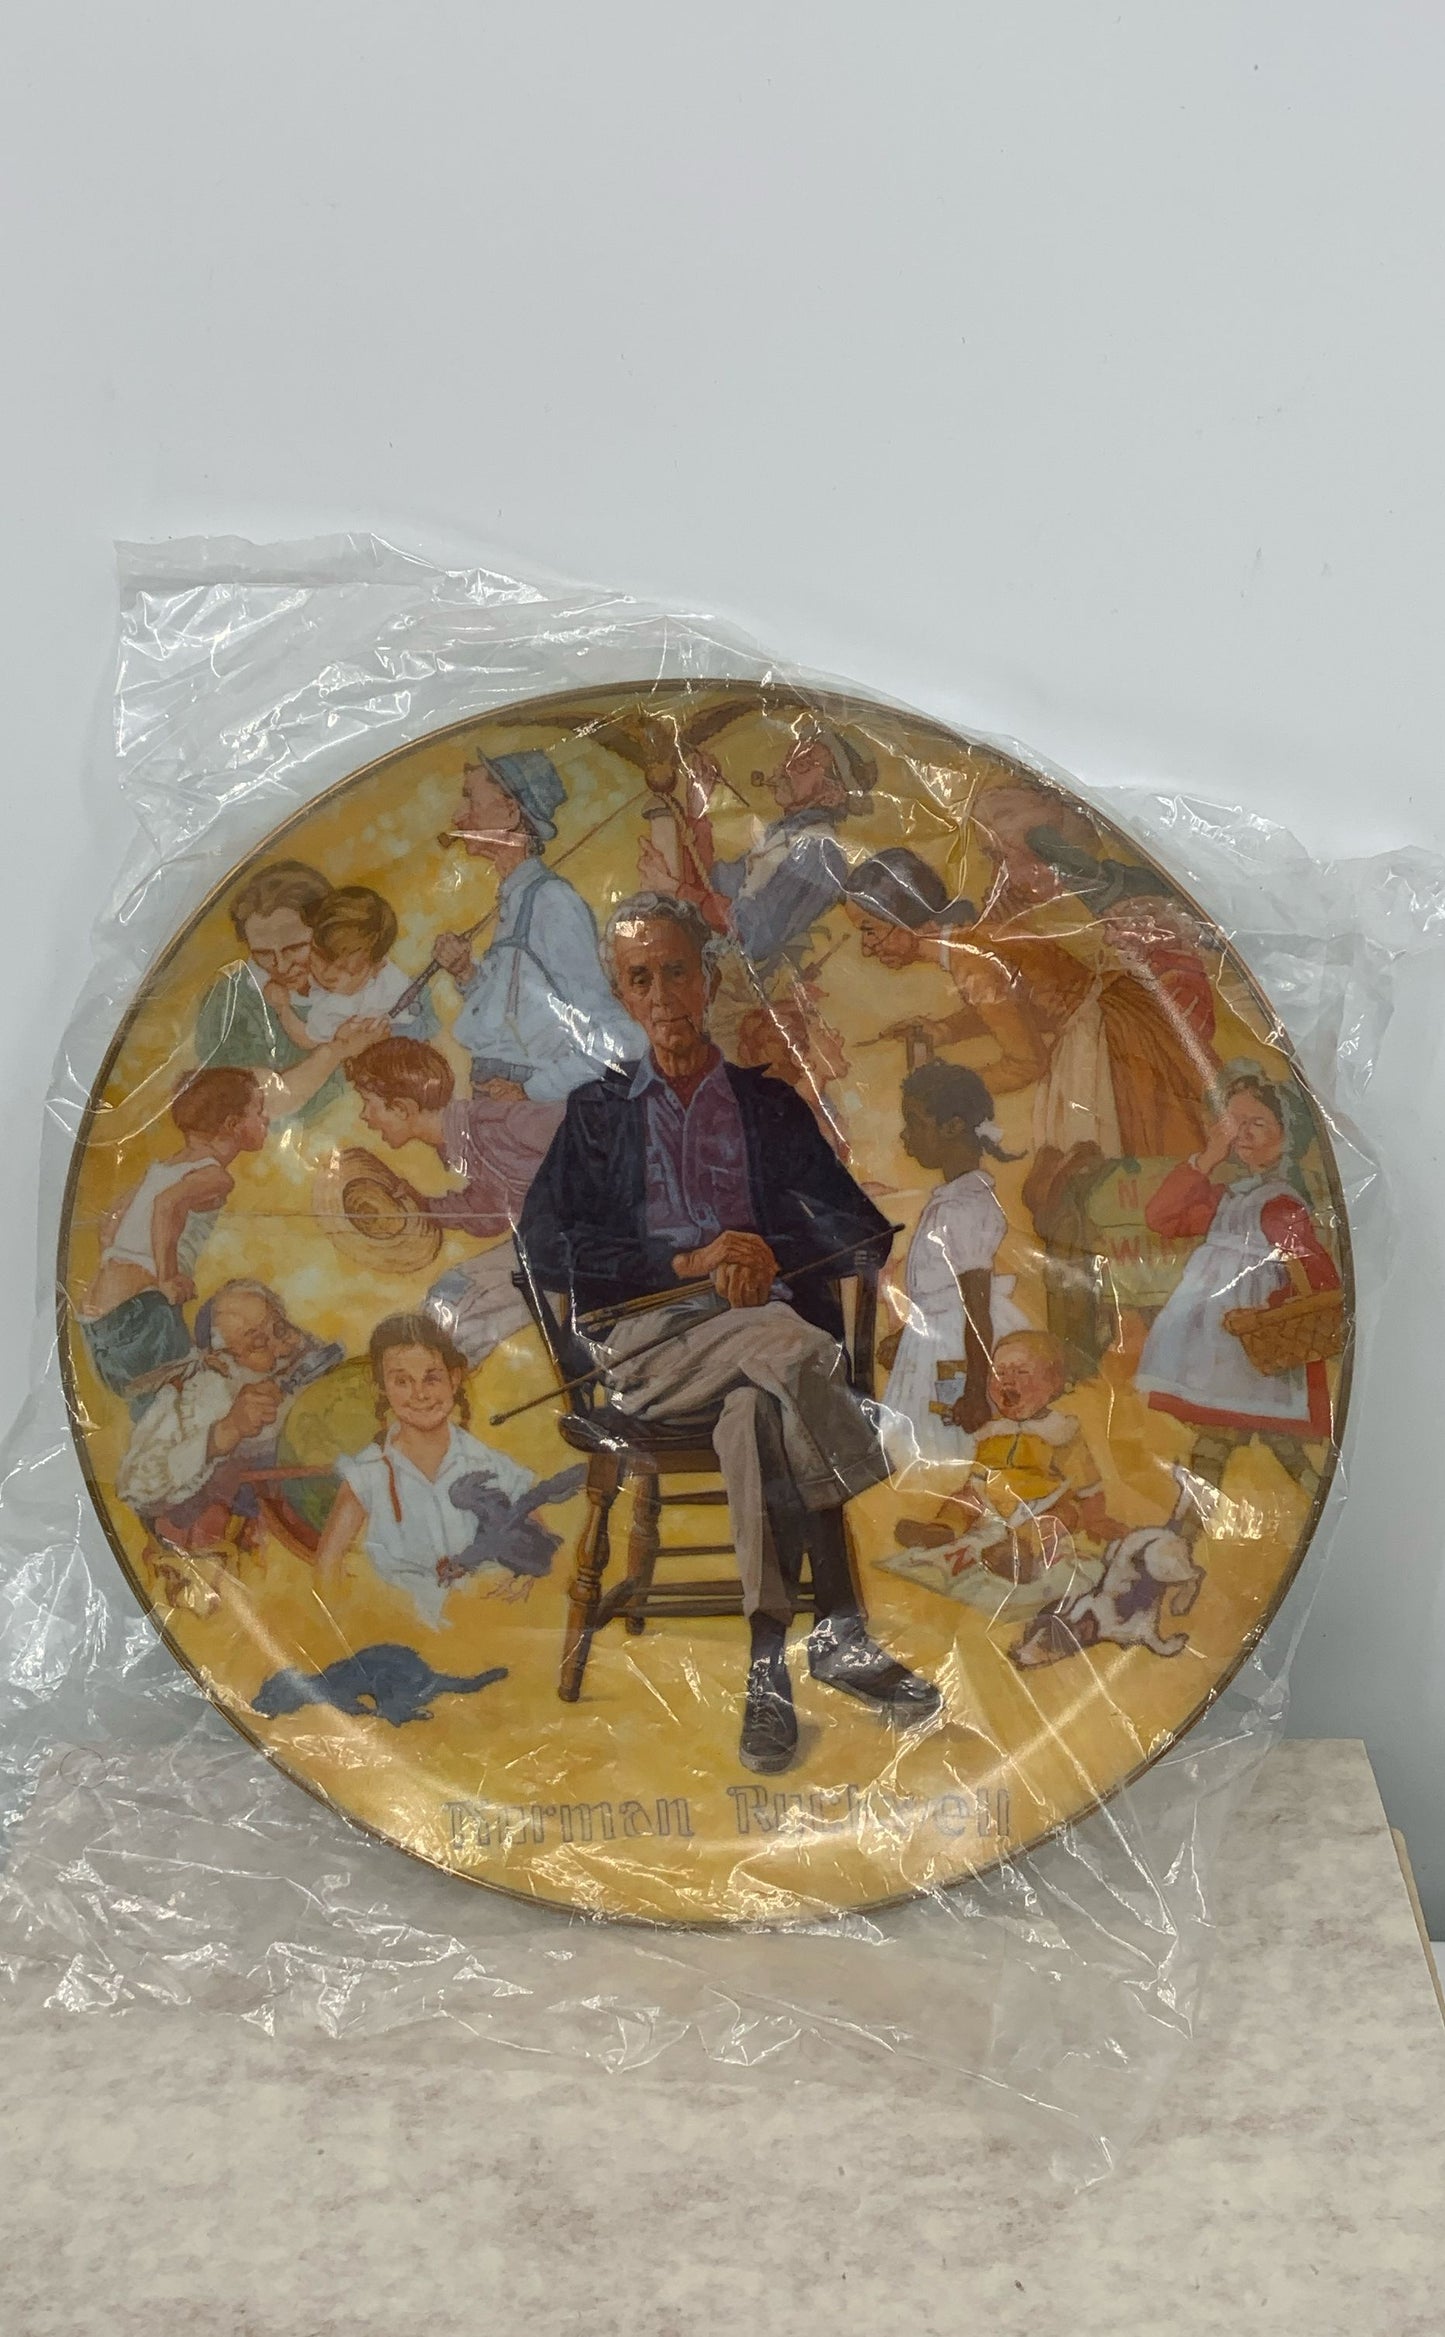 Vintage Norman Rockwell Remembered 1979 Limited Edition Commemorative Plate